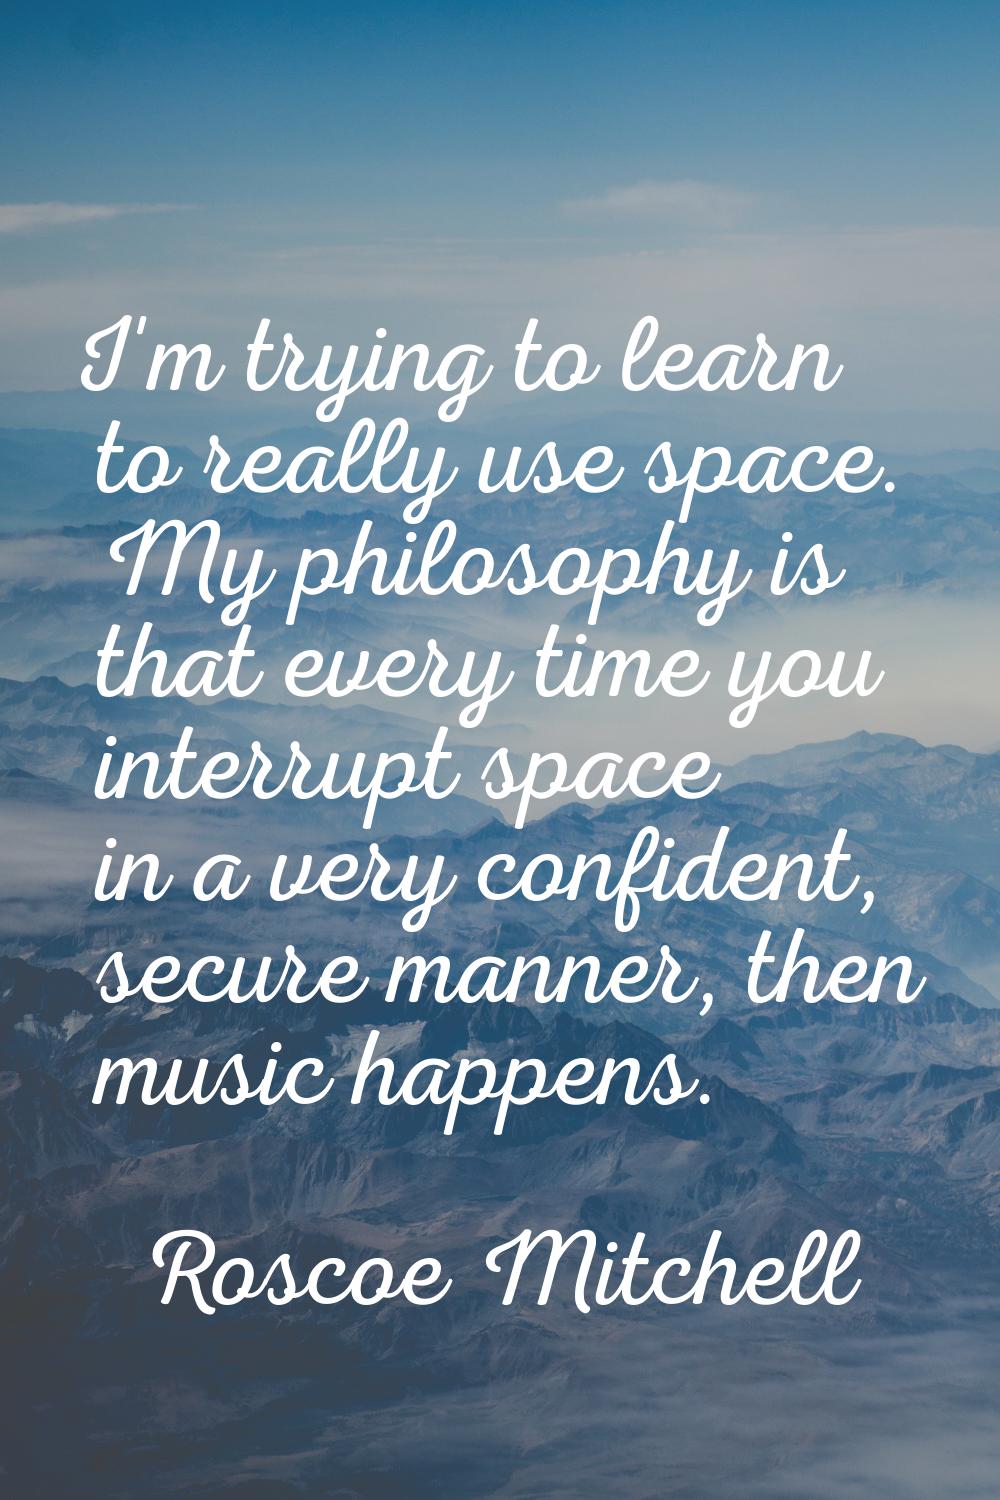 I'm trying to learn to really use space. My philosophy is that every time you interrupt space in a 